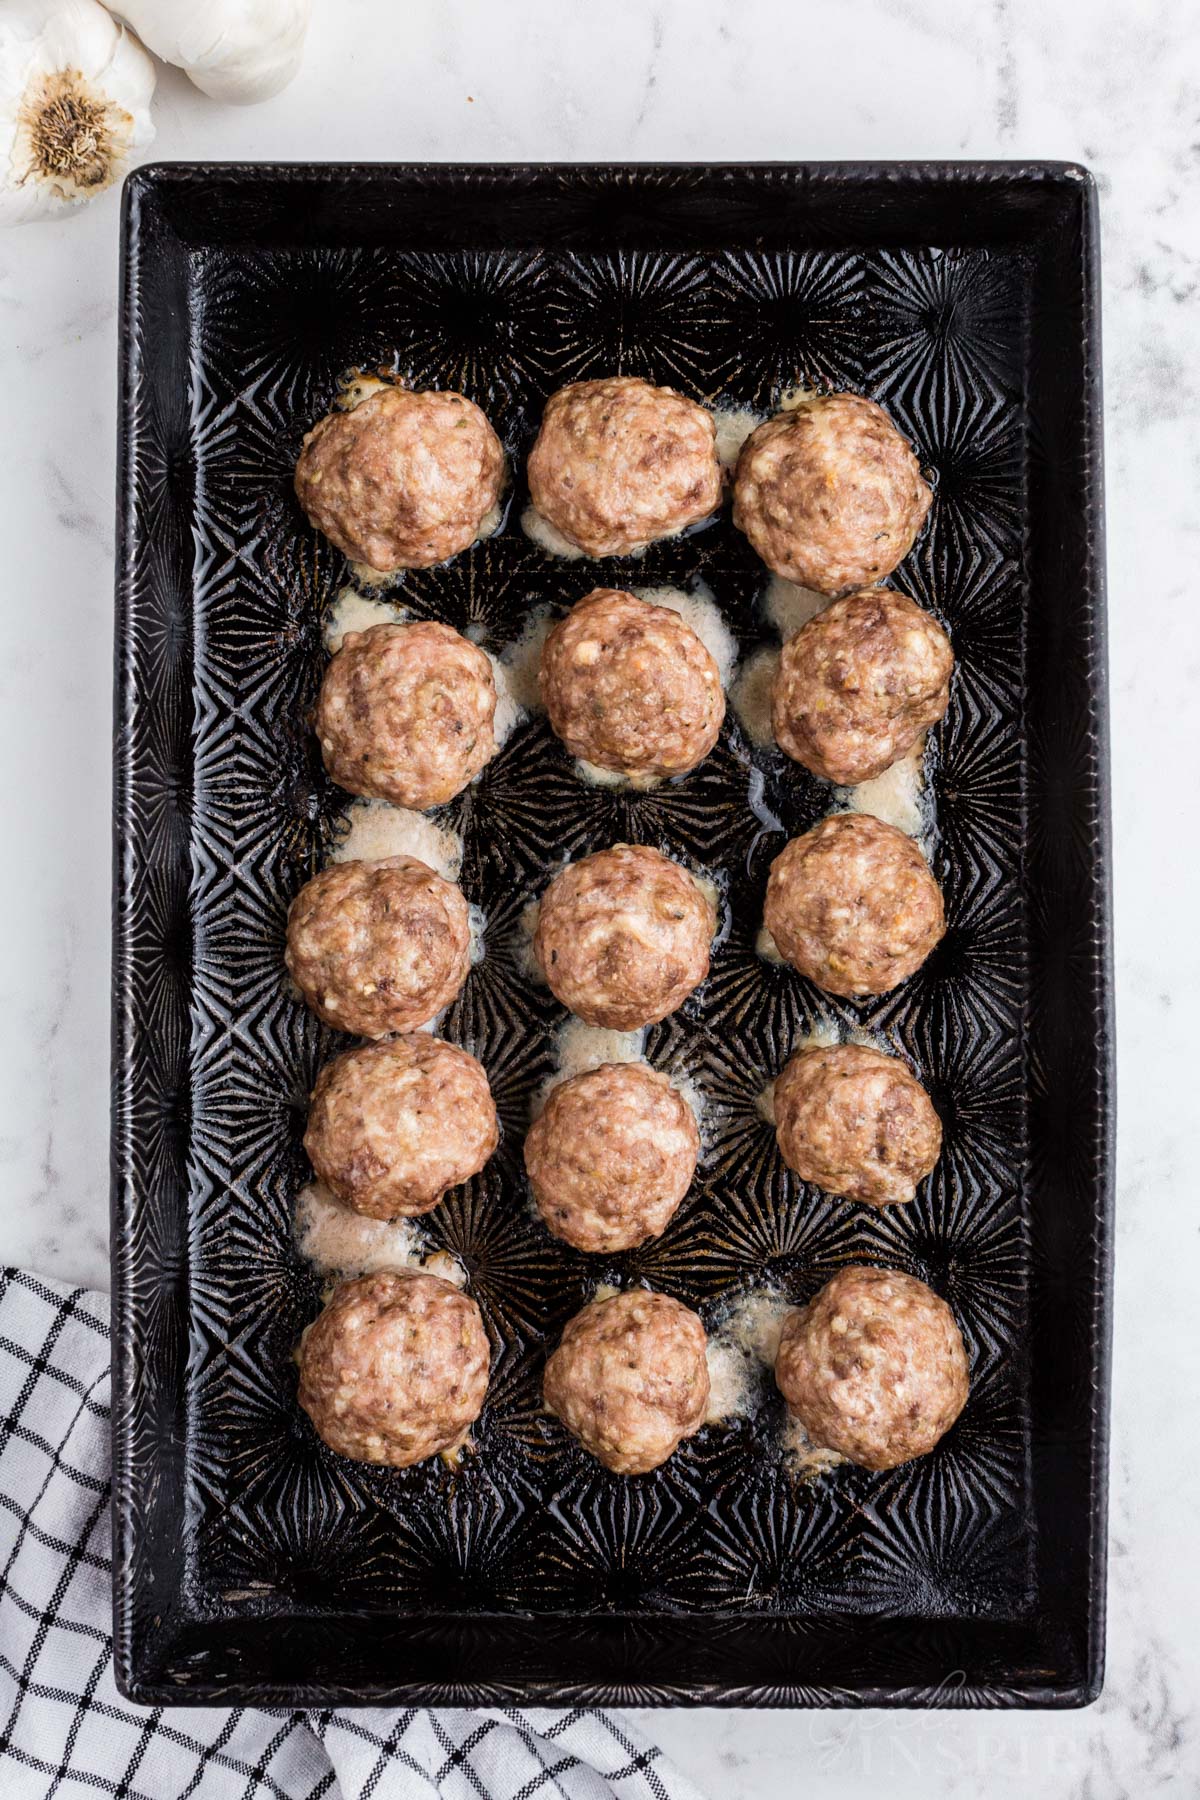 Uniform cooked meatballs on a baking tray.